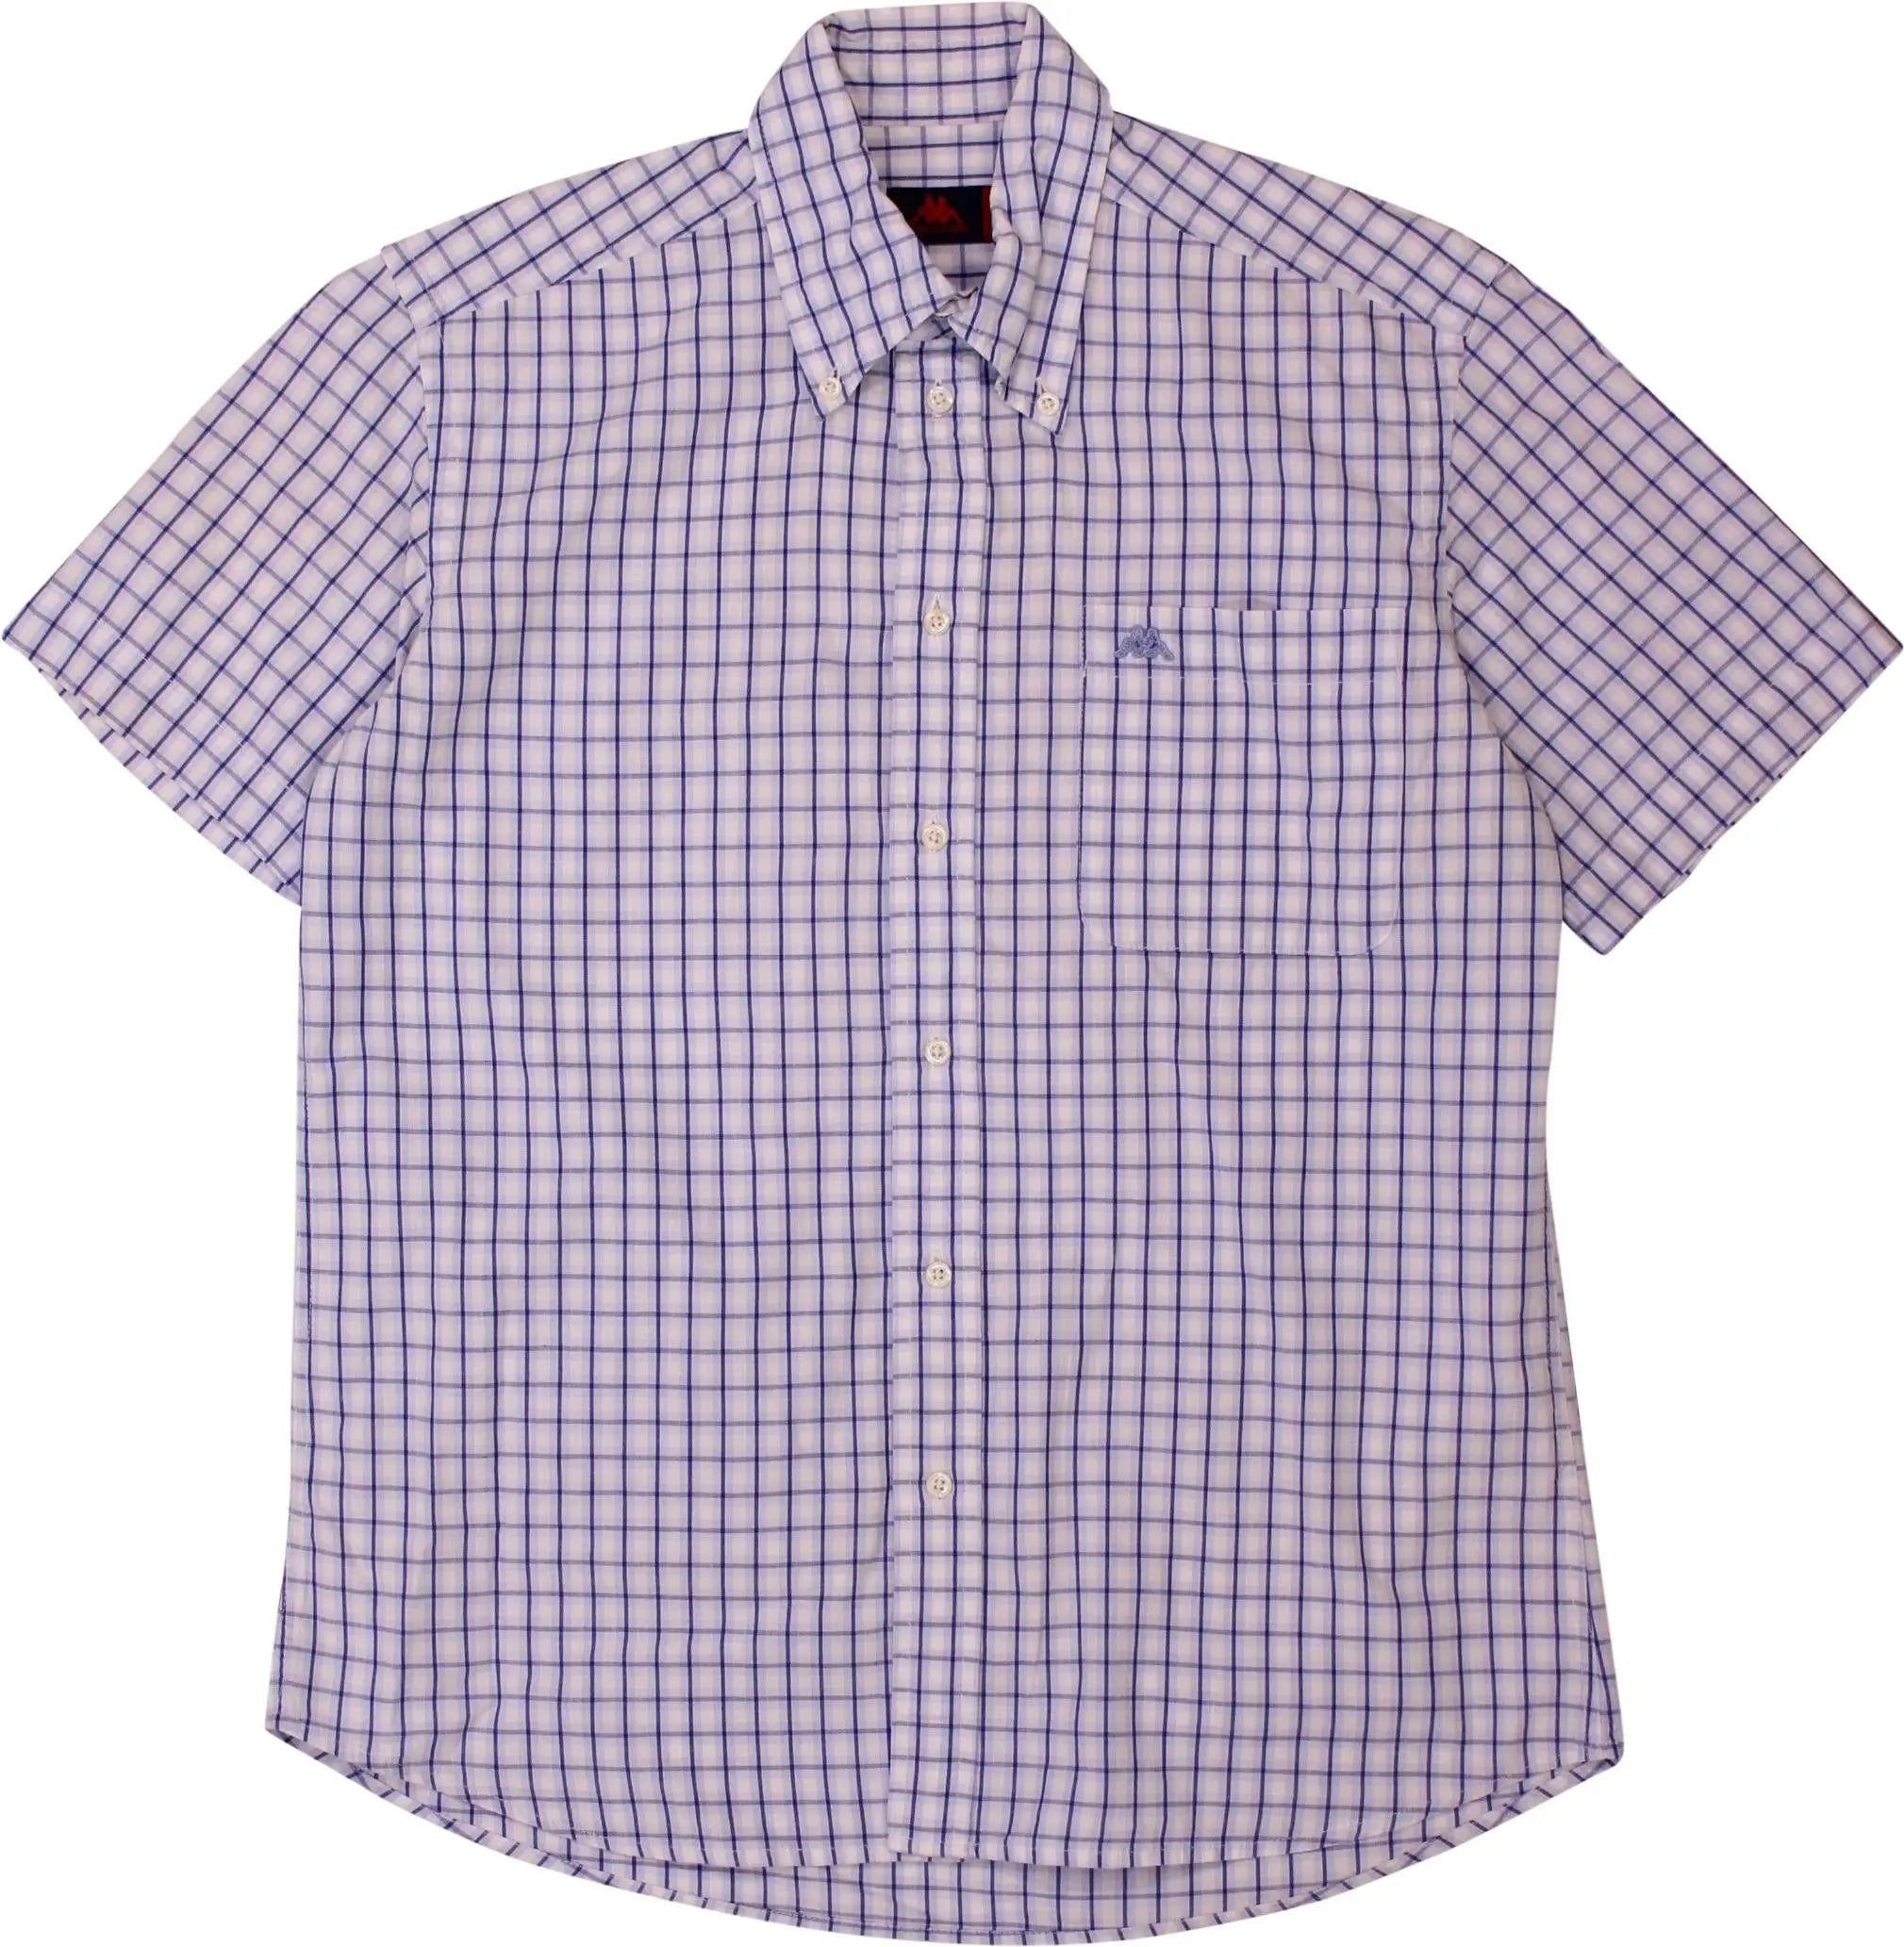 Kappa - Blue Checked Short Sleeve Shirt by Kappa- ThriftTale.com - Vintage and second handclothing